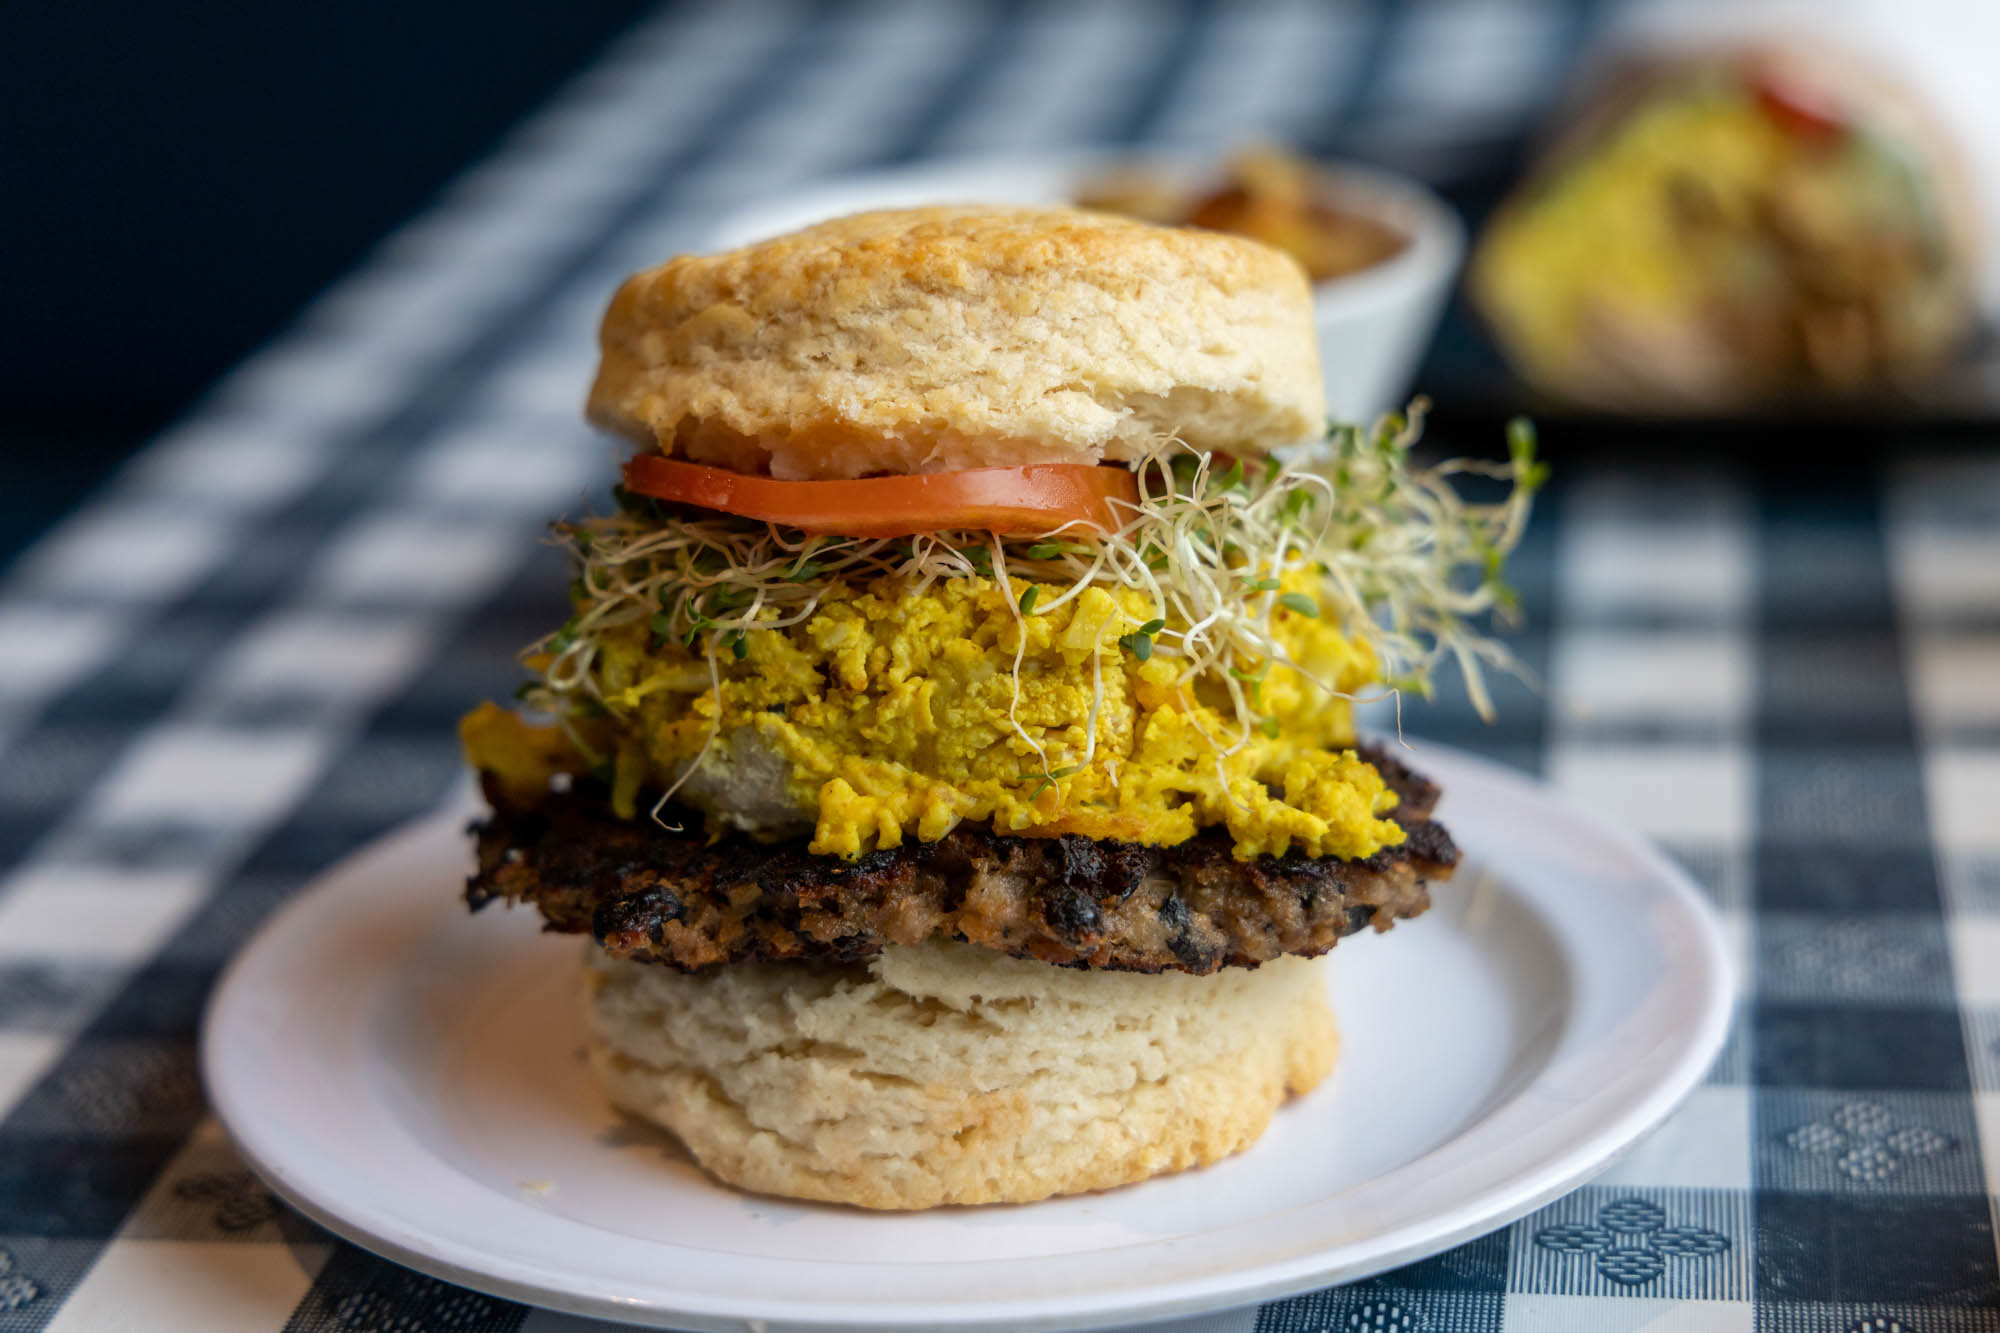 A biscuit sandwich on a white plate and a checked  table cloth stuffed with sprouts, tomator, and a plant-based sausage patty.